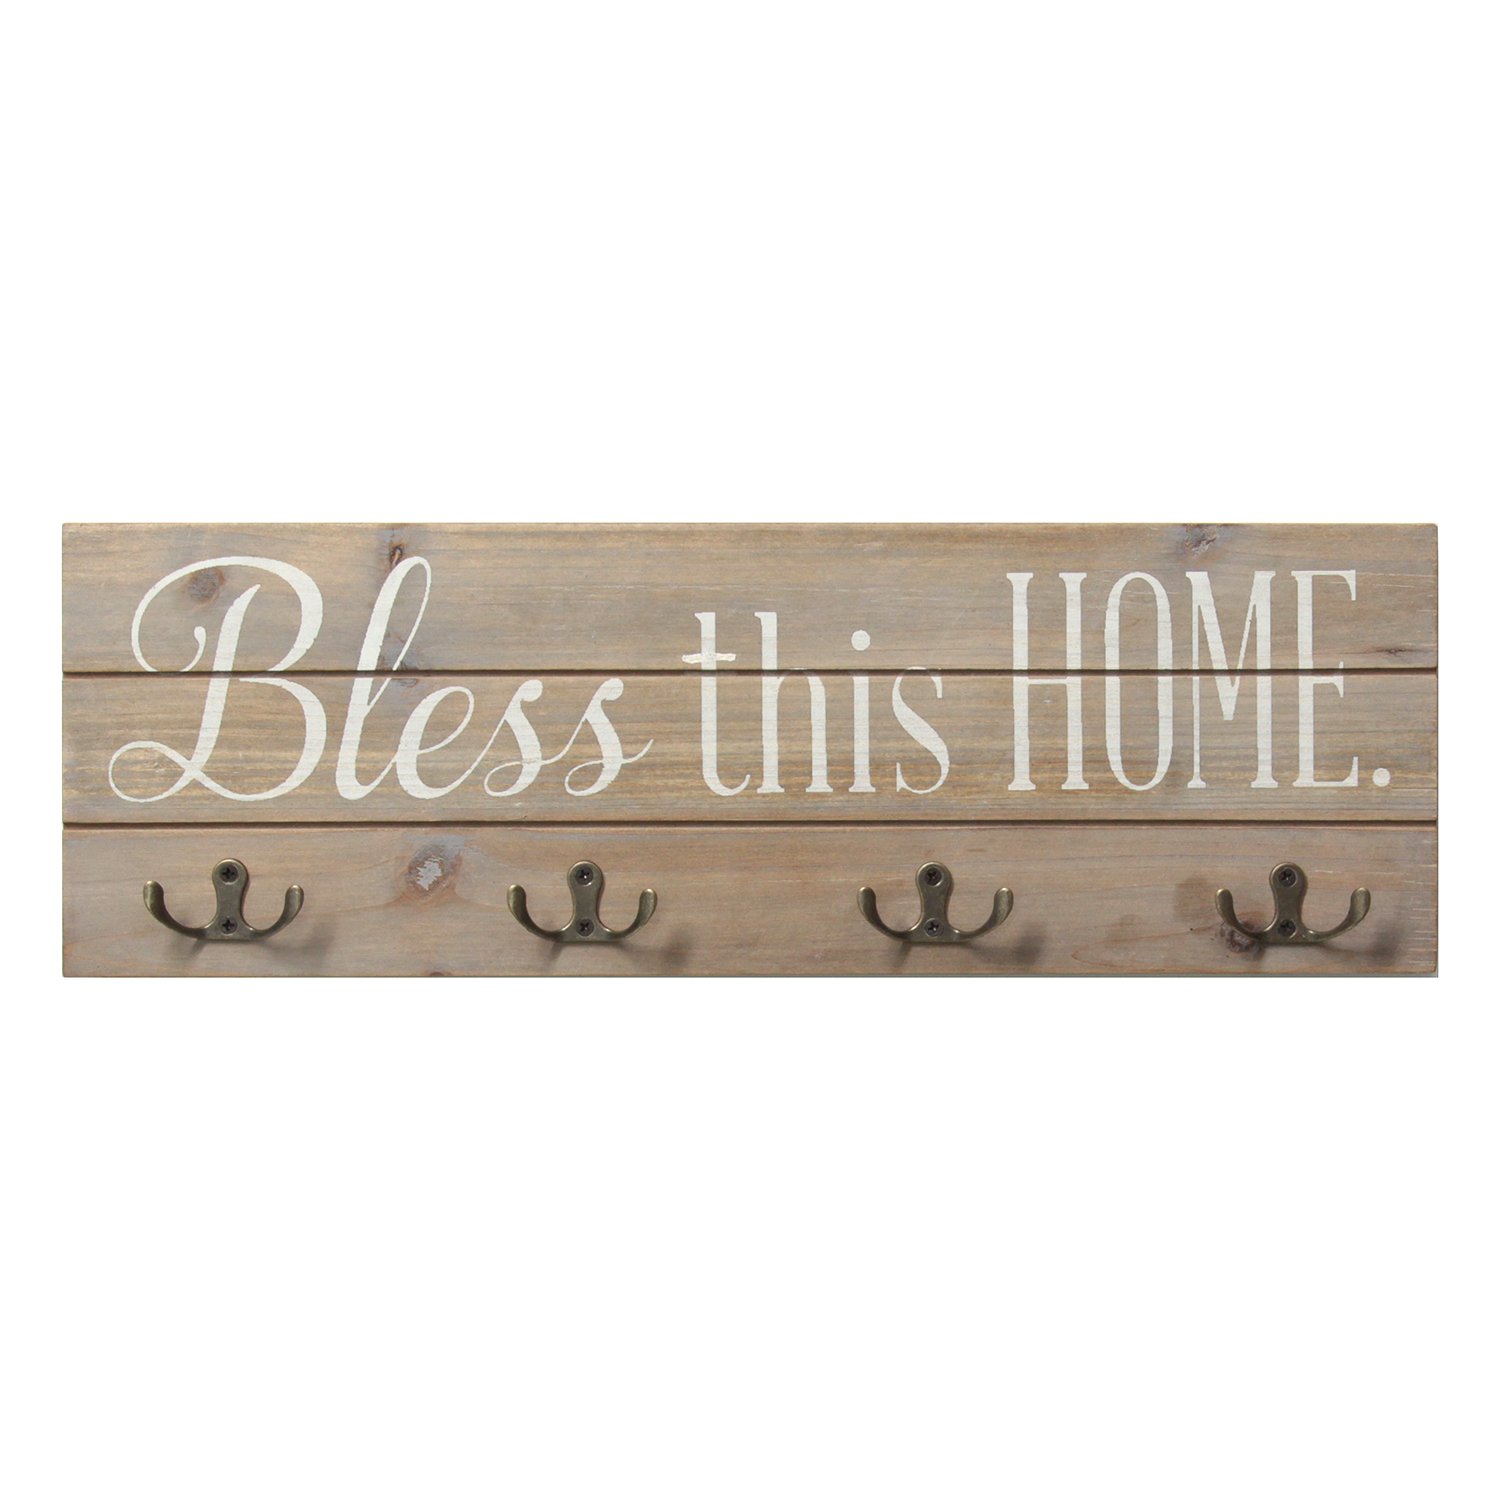 Bless This Home Wall Hanging with Handy Metal Hooks for haning